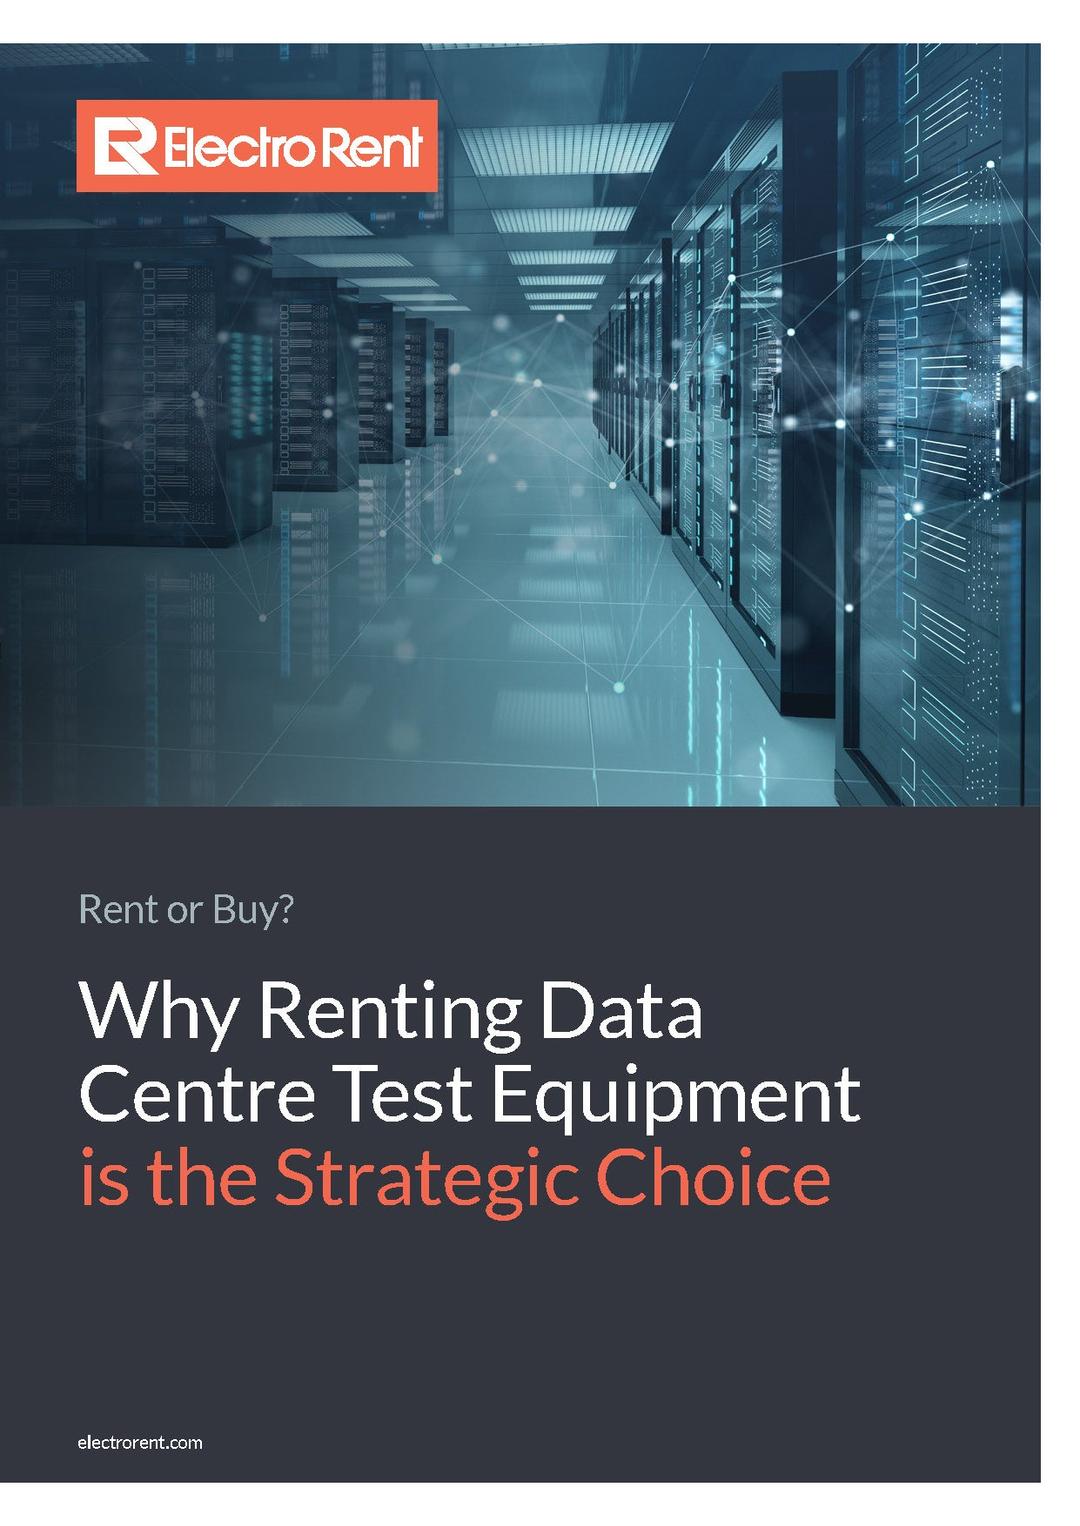 Why Rental Is the Strategic Choice for Data Centre Testing, image